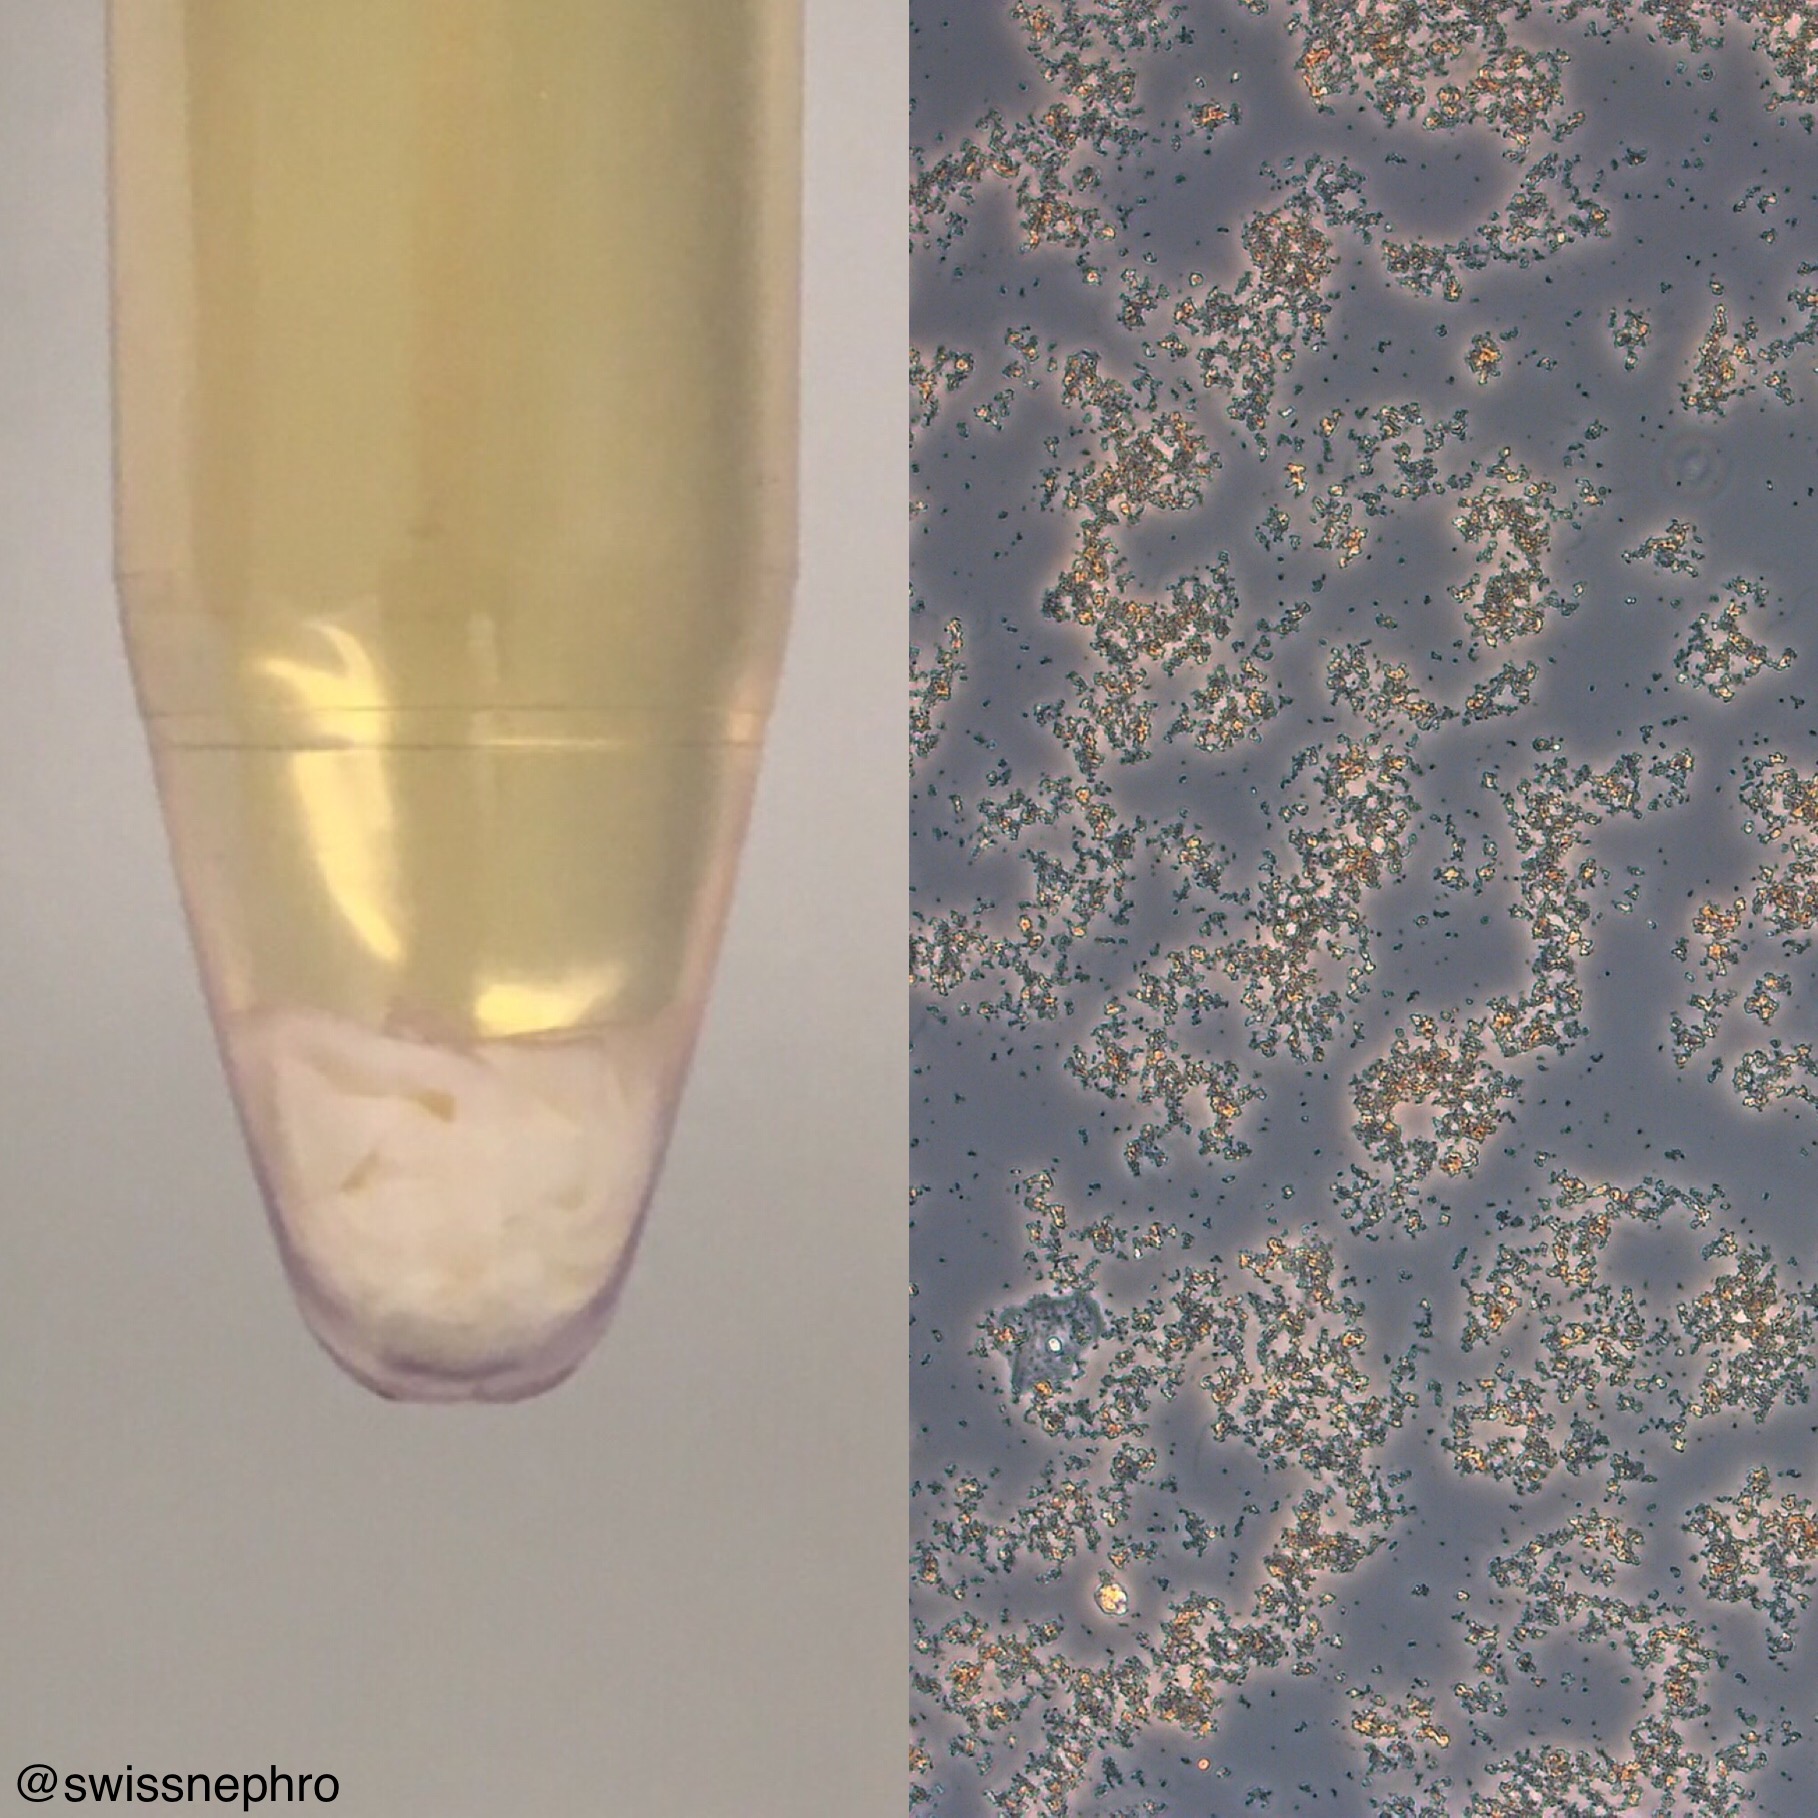 Urine Sediment Of The Month The Visible Sediment Renal Fellow Network 8159